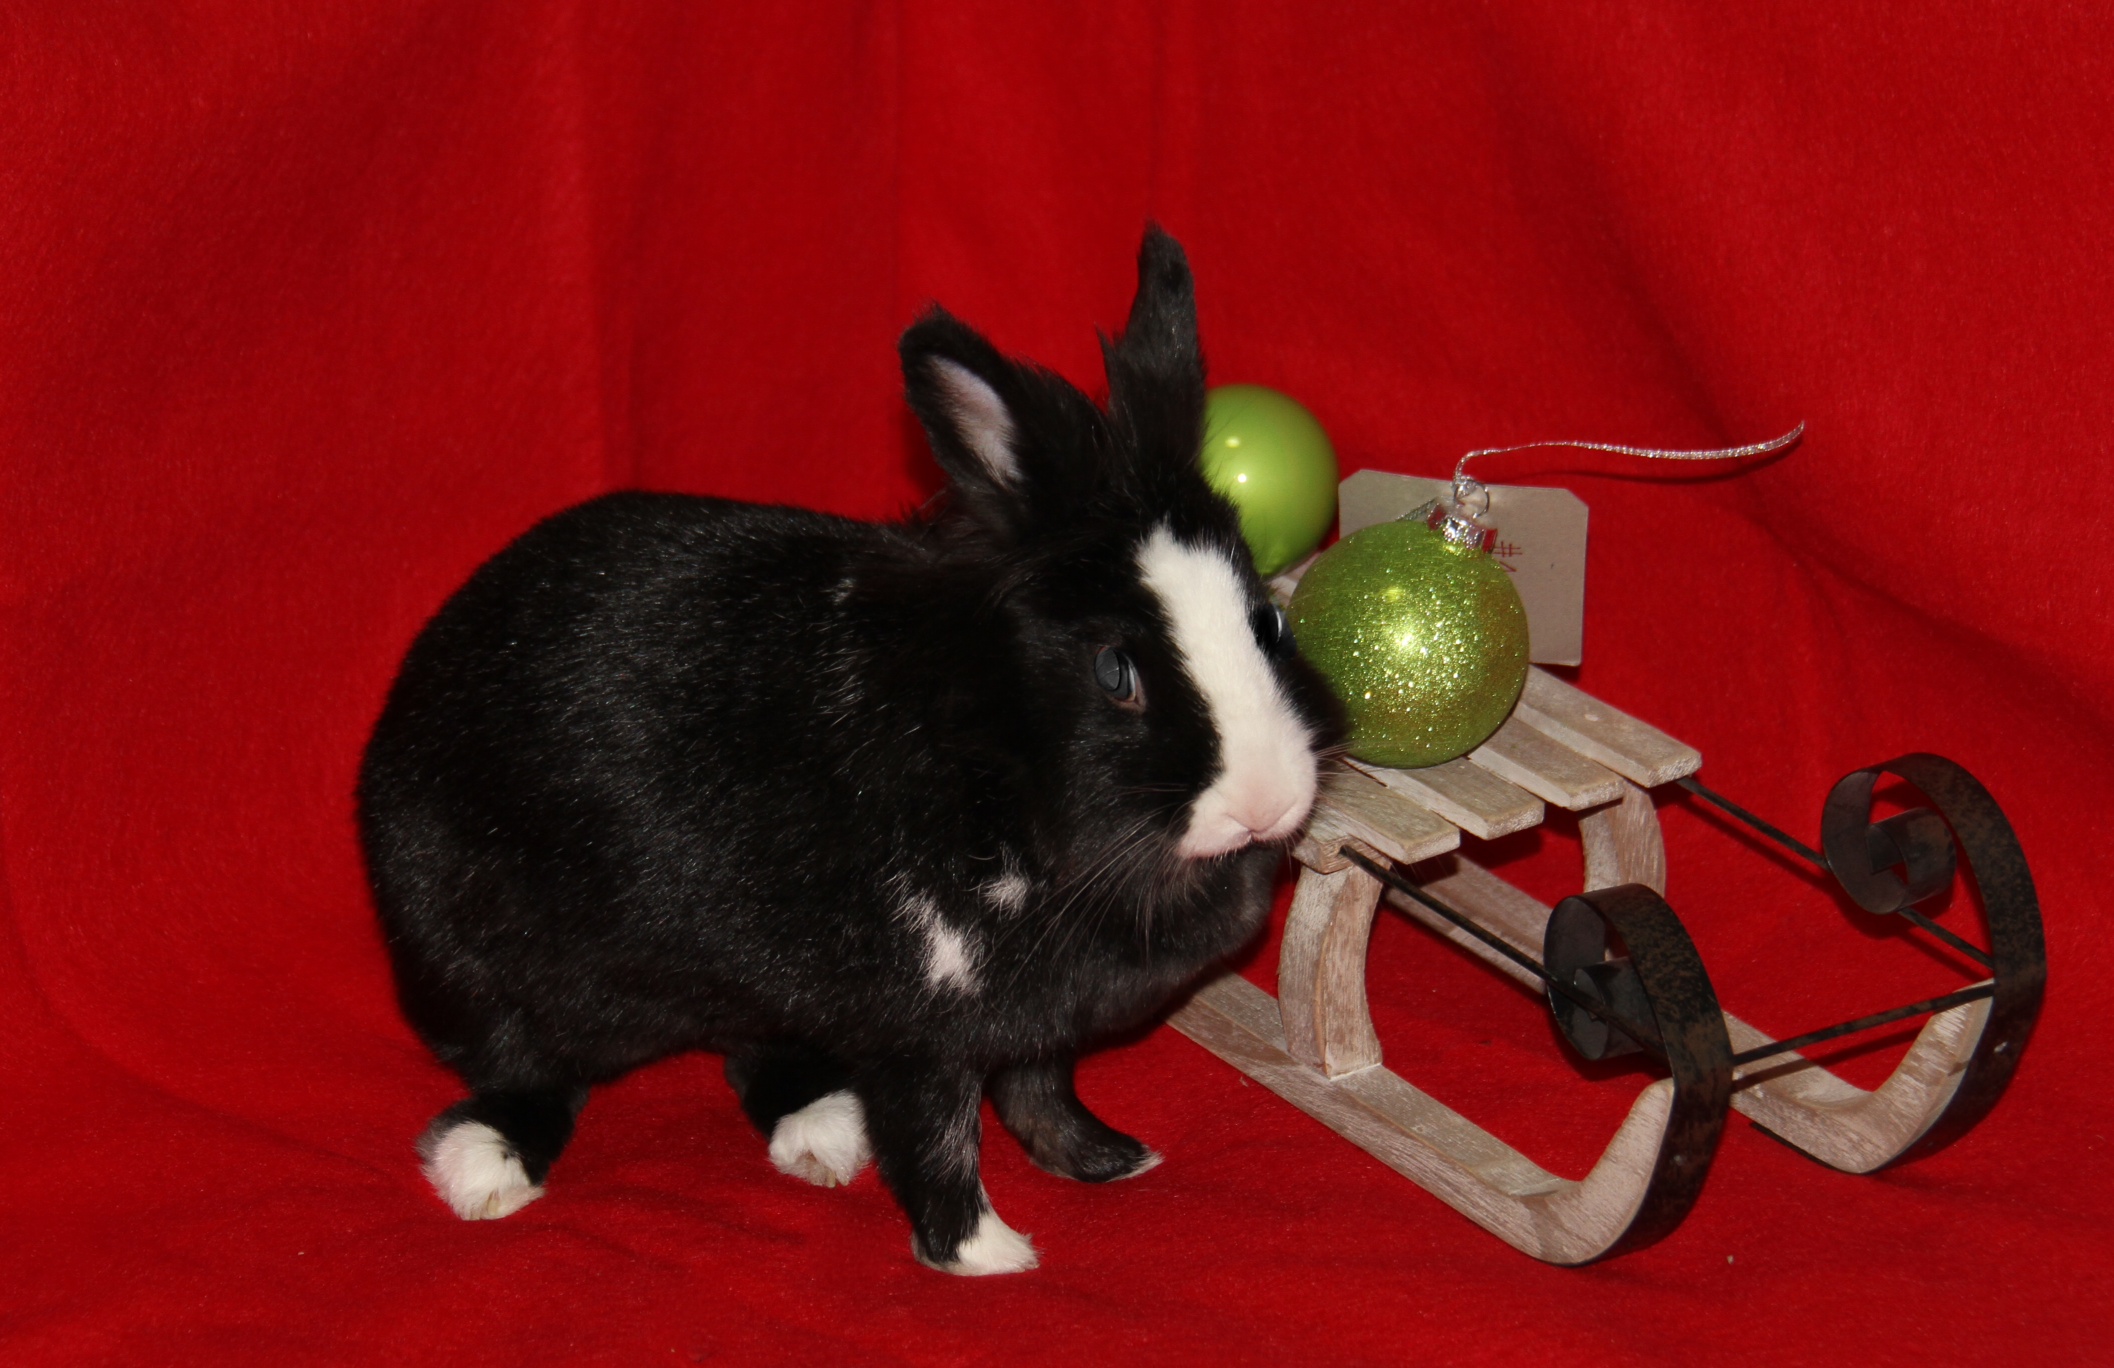 Bunny Gets Curious During Her Christmas Photoshoot 1